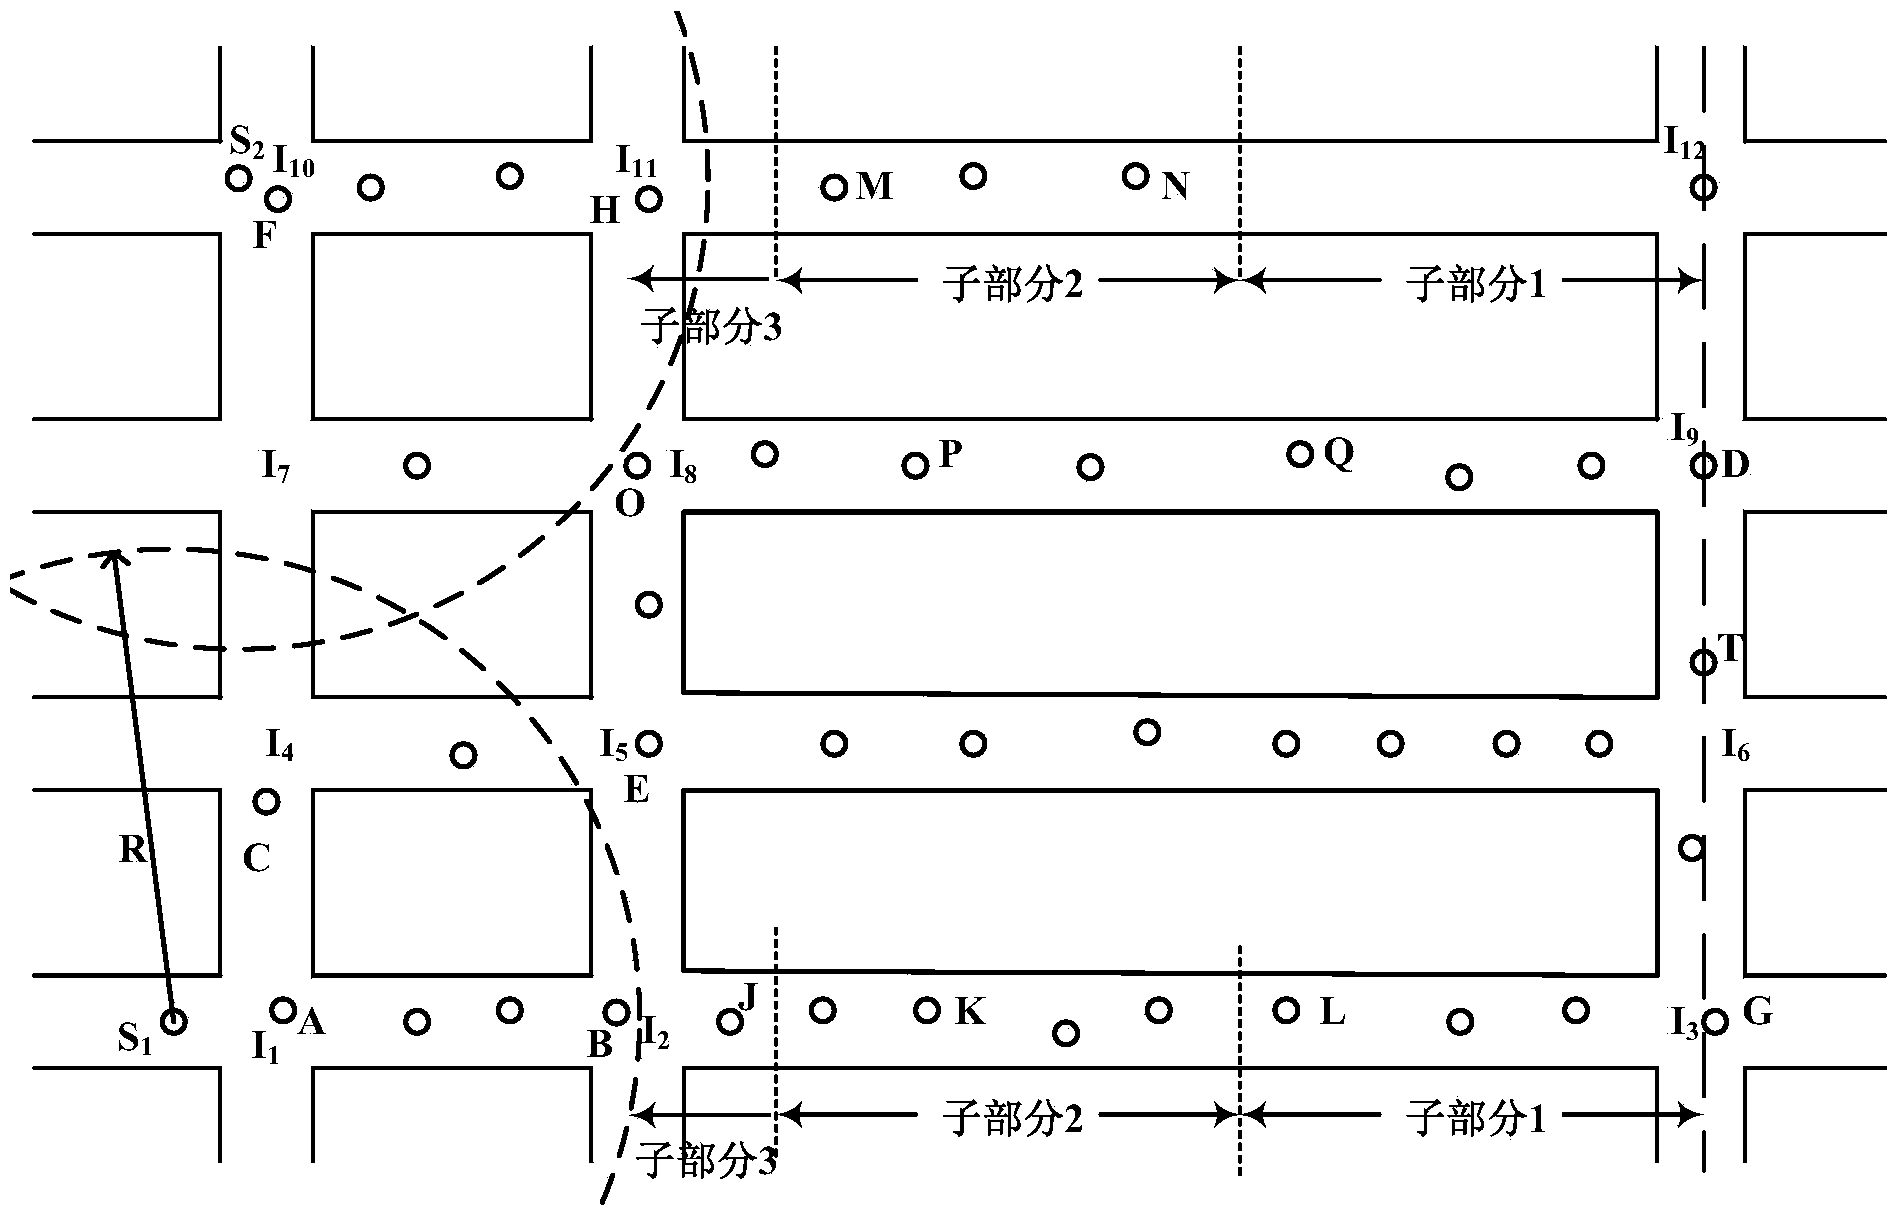 Intersection routing method in vehicle self-organized network on the basis of path segment length